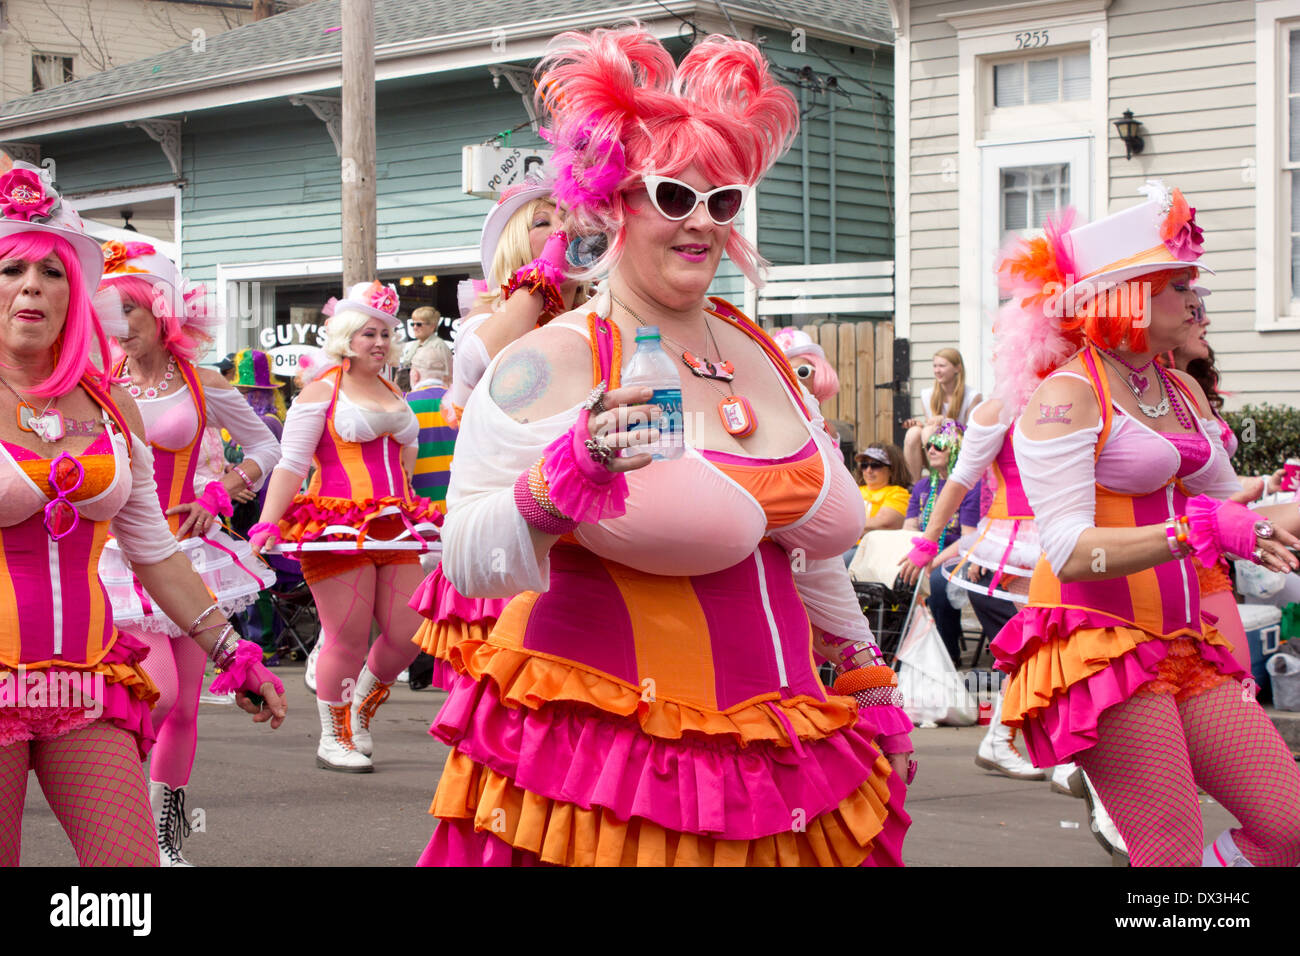 The Pussyfooters marching group strutting in a New Orleans parade. Stock Photo